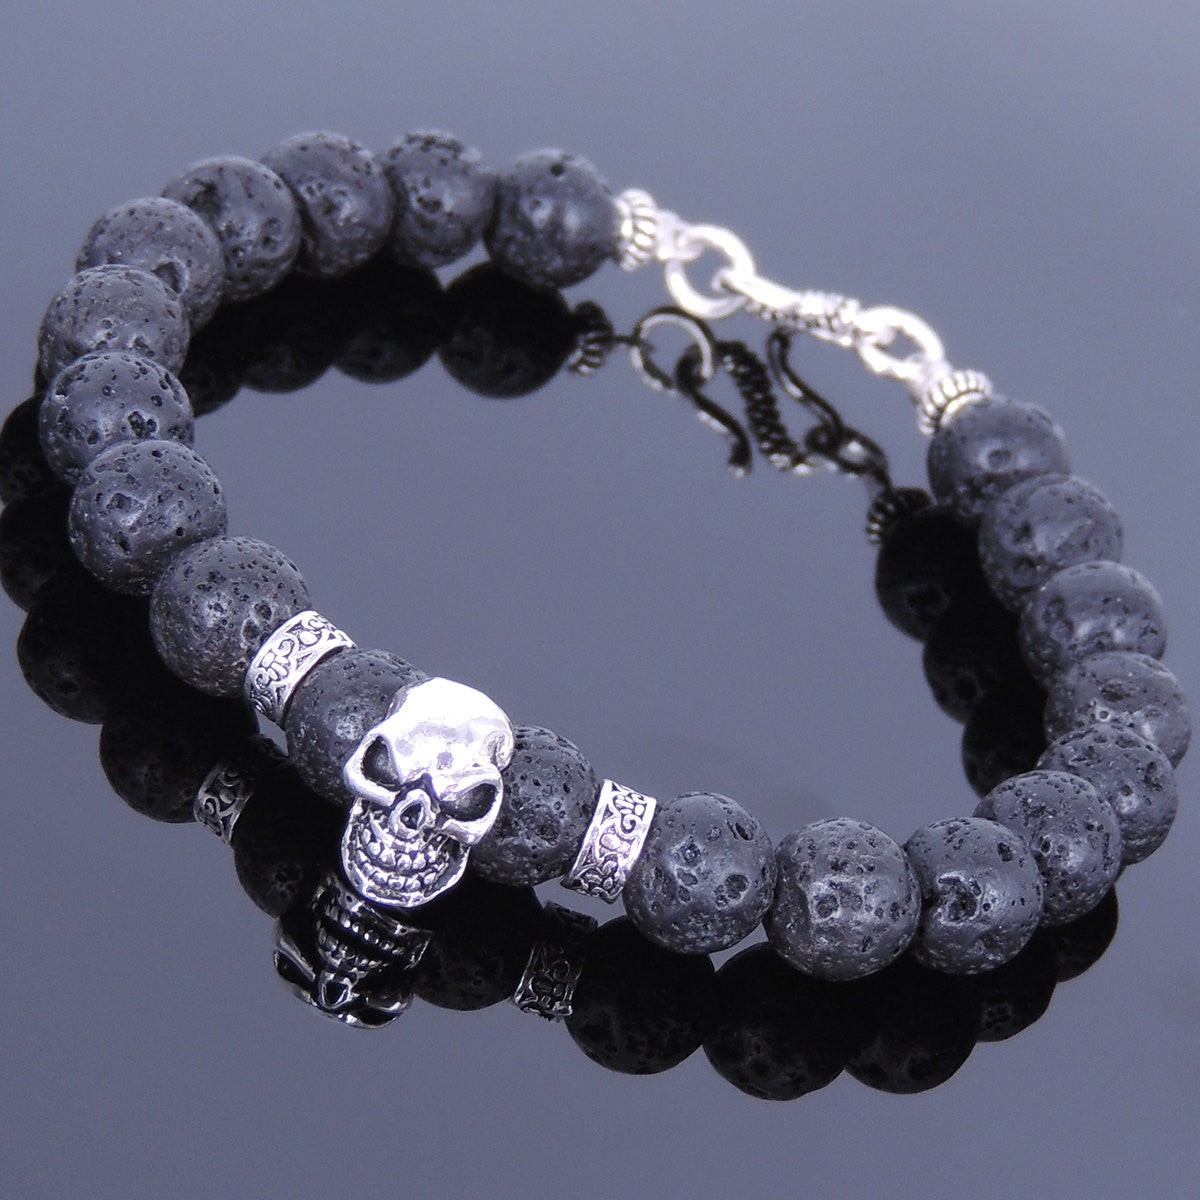 8mm Lava Rock Healing Stone Bracelet with S925 Sterling Silver Protection Skull Bead, Celtic Spacers, & S-Hook Clasp - Handmade by Gem & Silver BR353